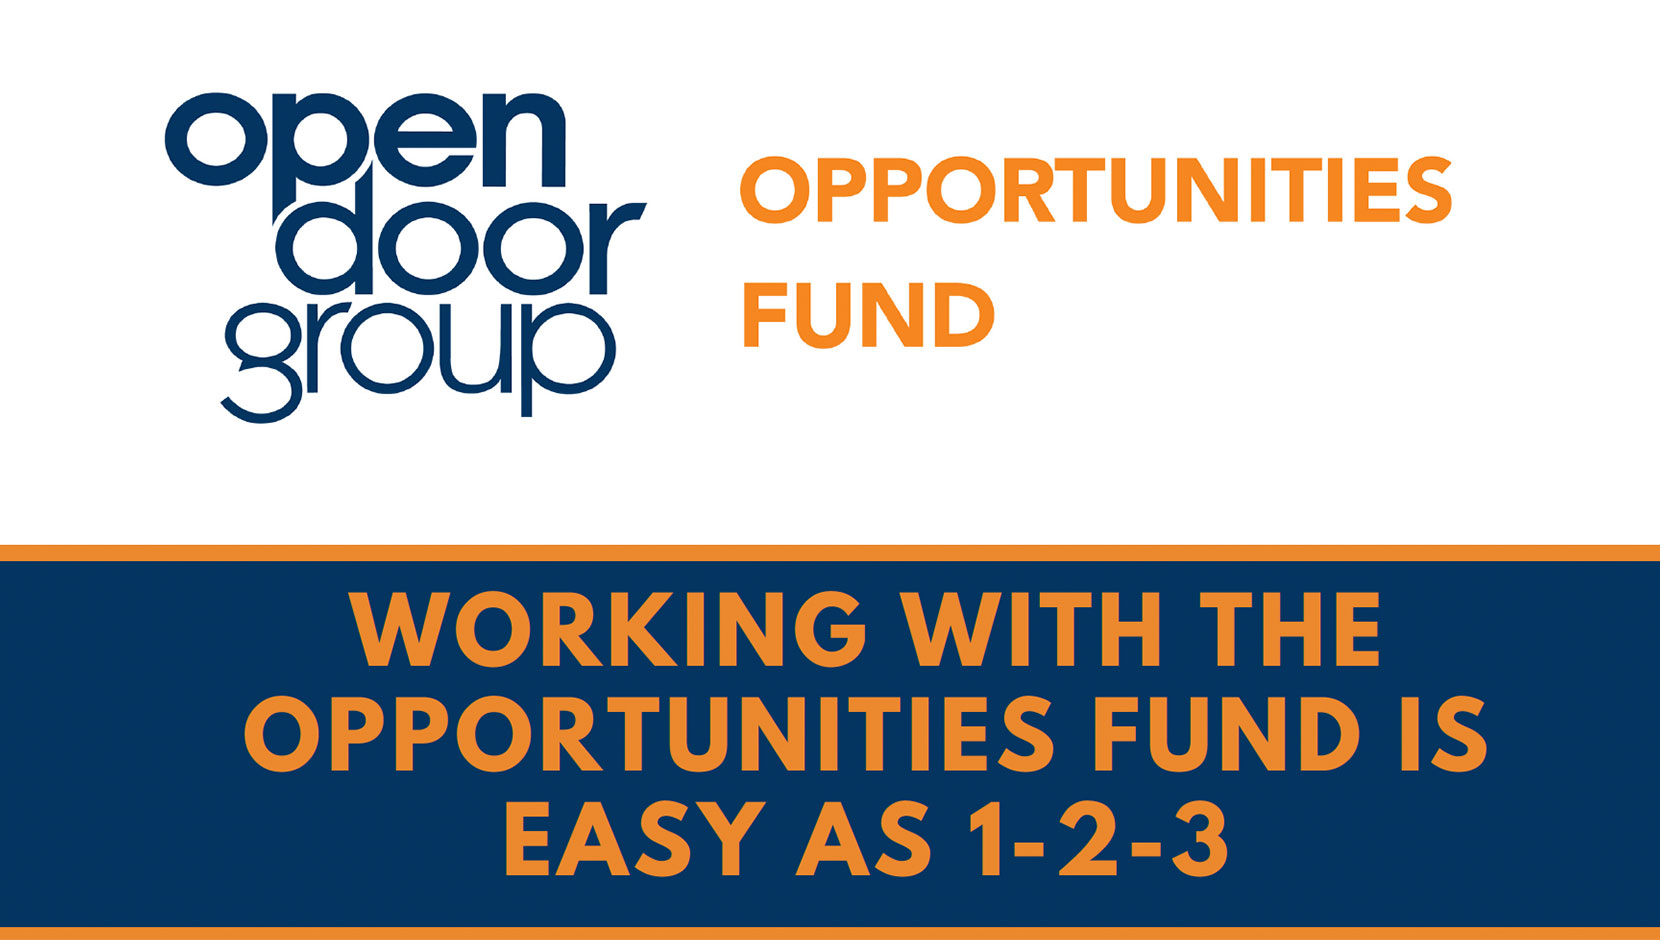 Screenshot from the resource. Text reads: Opportunities Fund. Working with the Opportunities Fund is easy as 1,2,3.